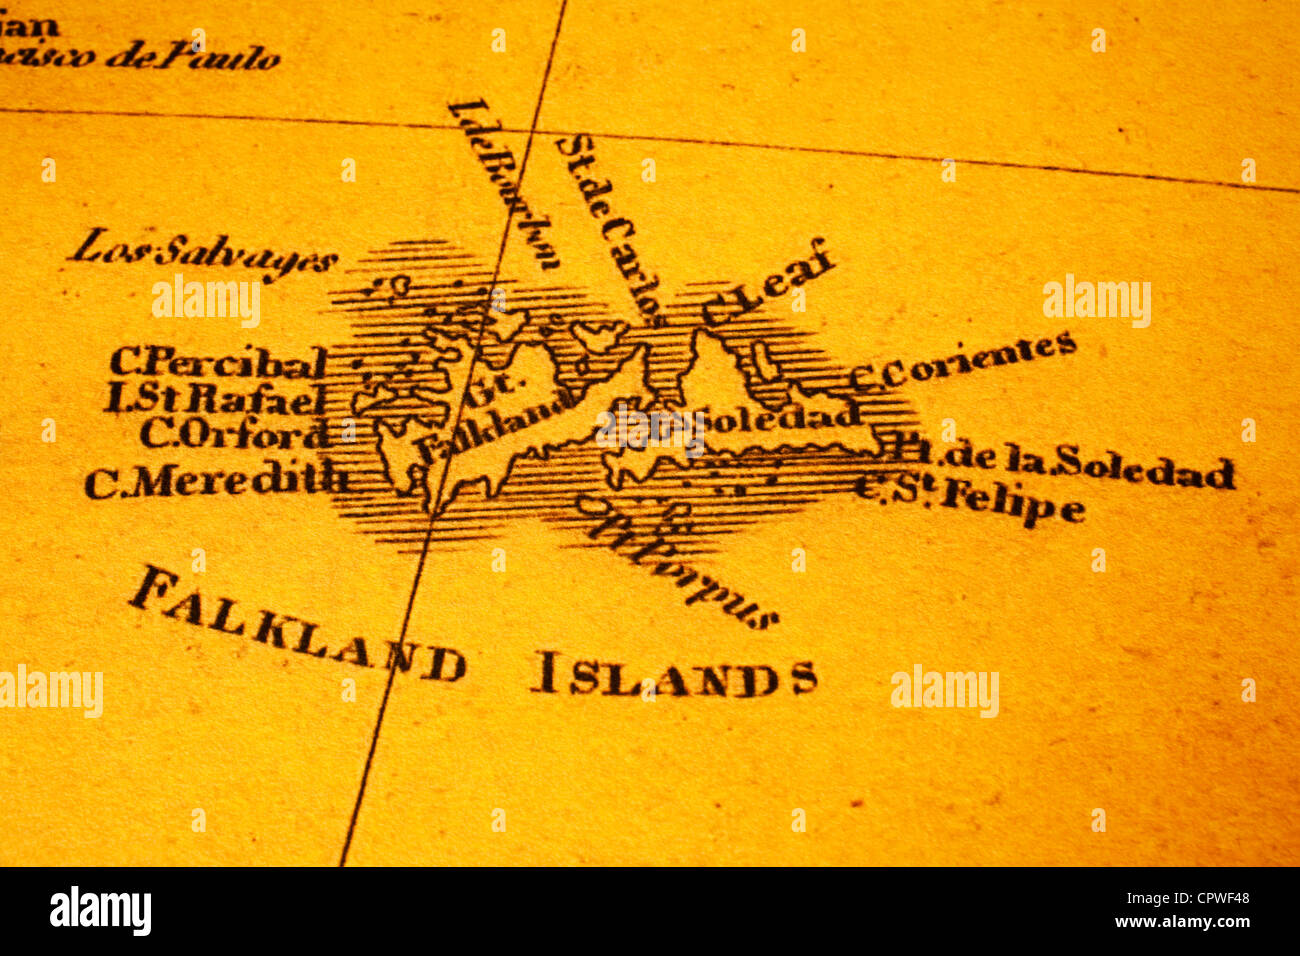 Old map of the Falkland Islands or Malvinas. Map is from 1817 and is out of copyright. Stock Photo